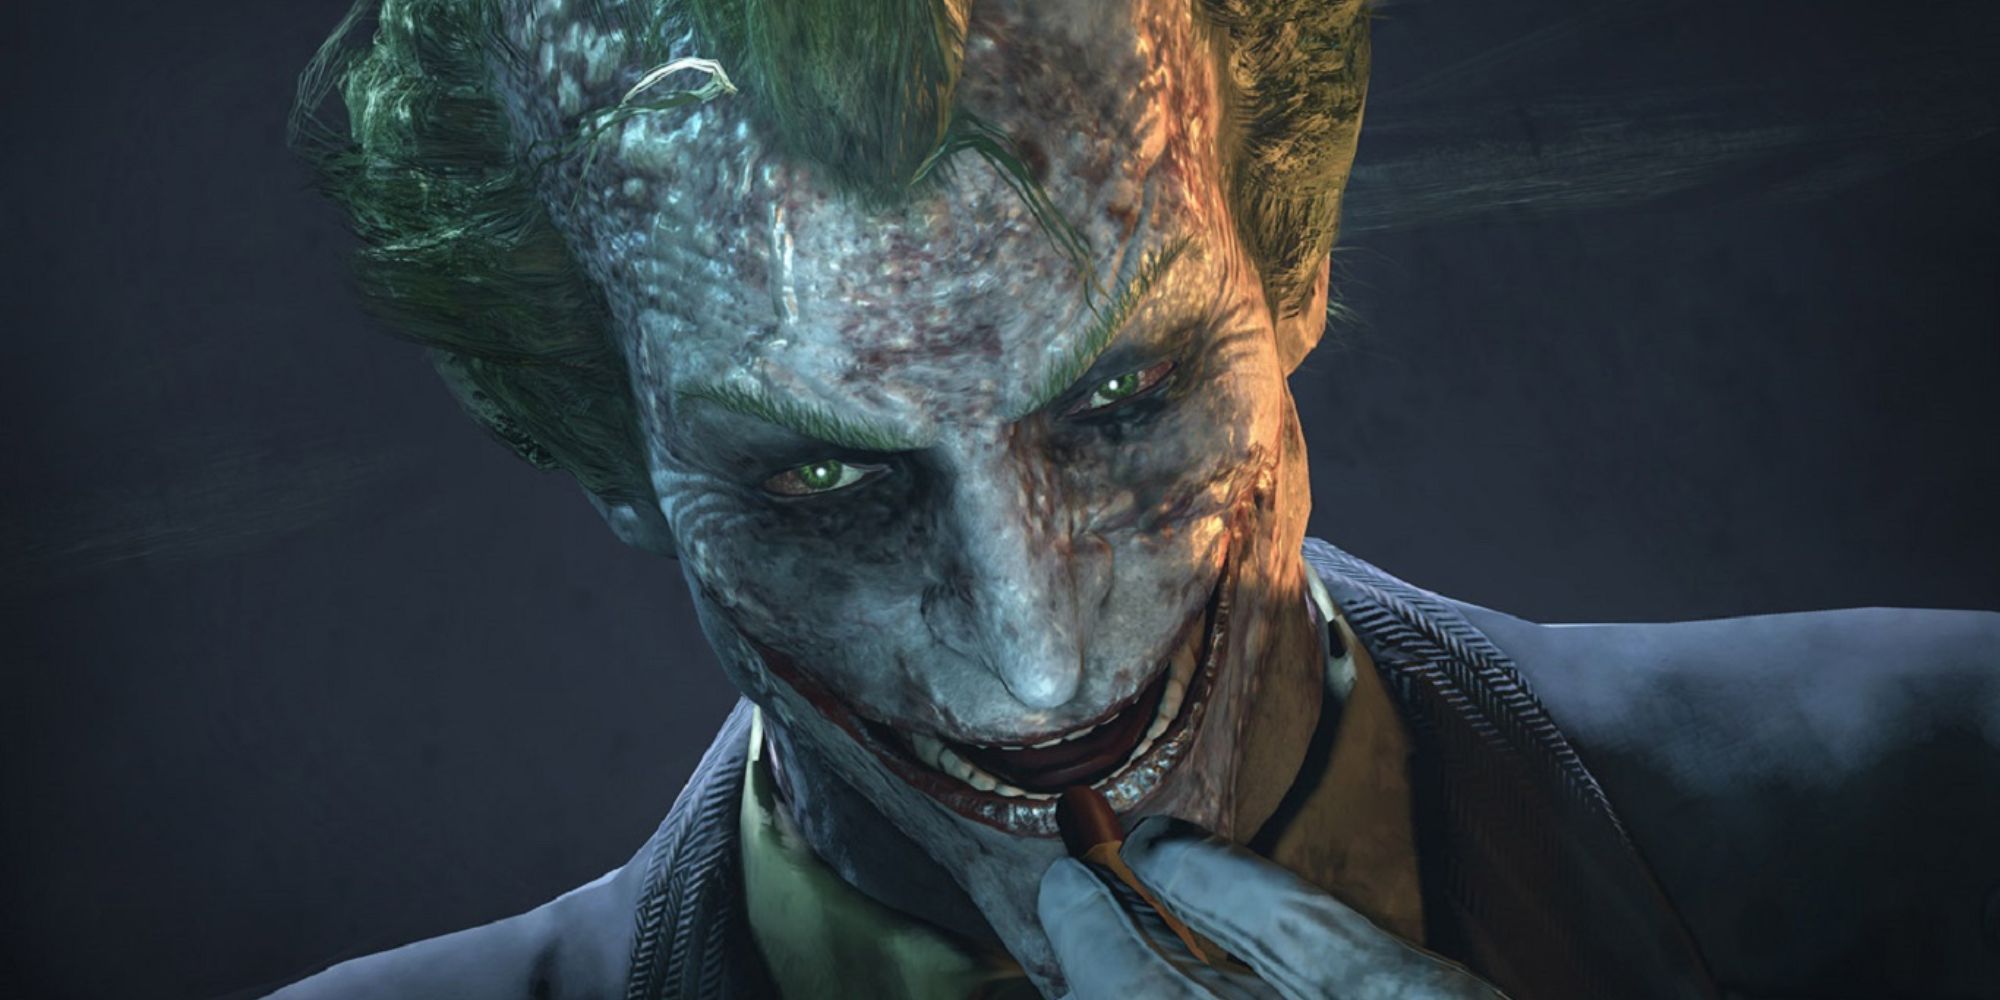 The Joker looks into the camera as he applies lipstick.